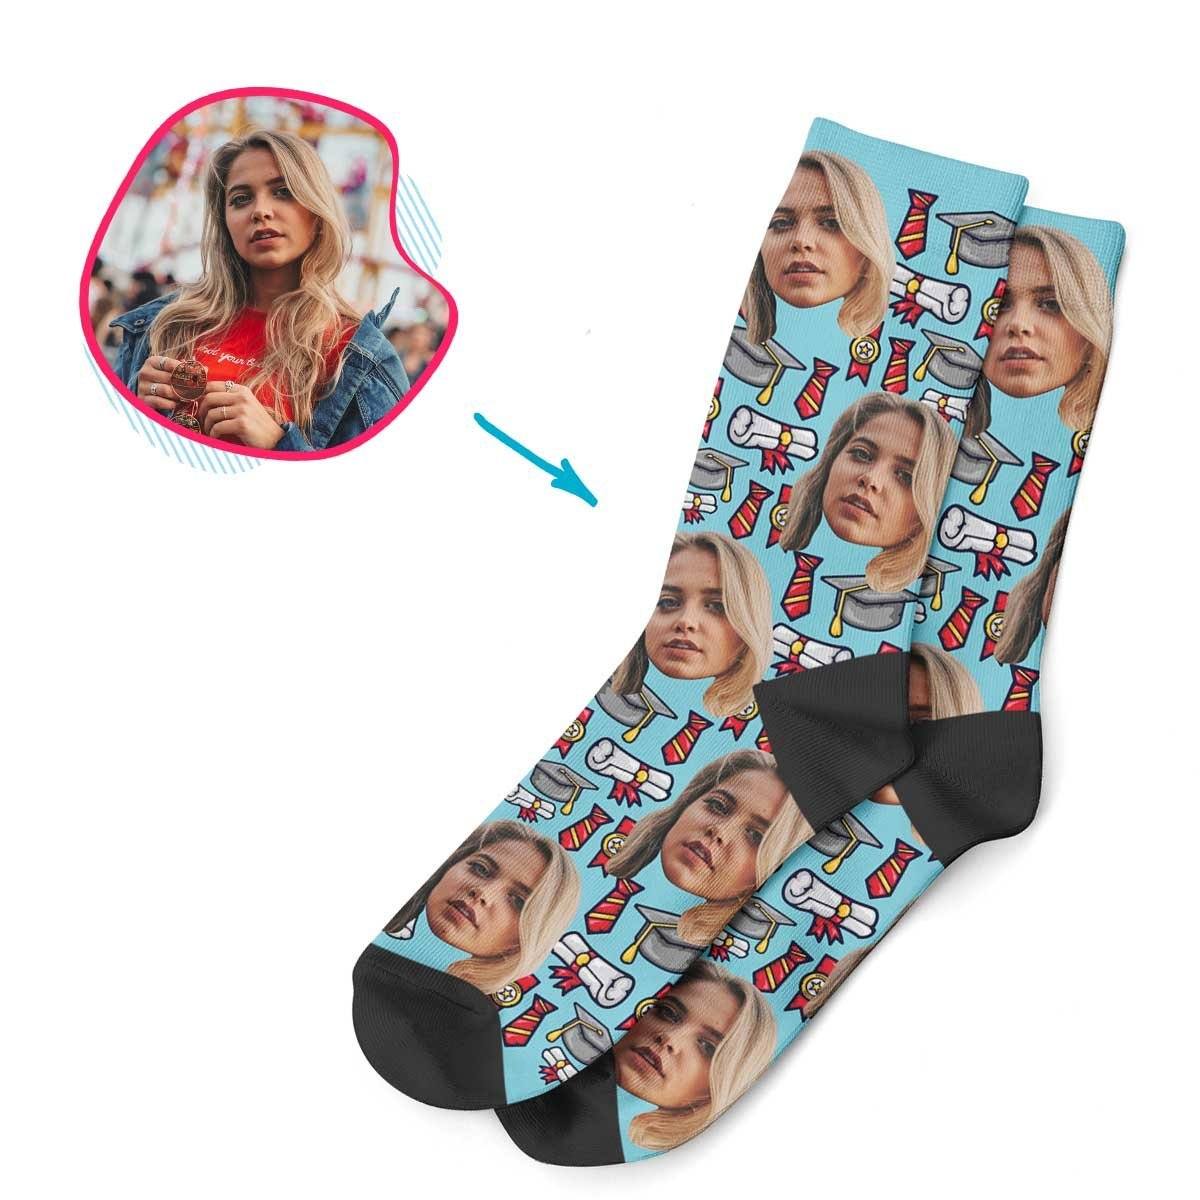 Blue Students & Graduates personalized socks with photo of face printed on them